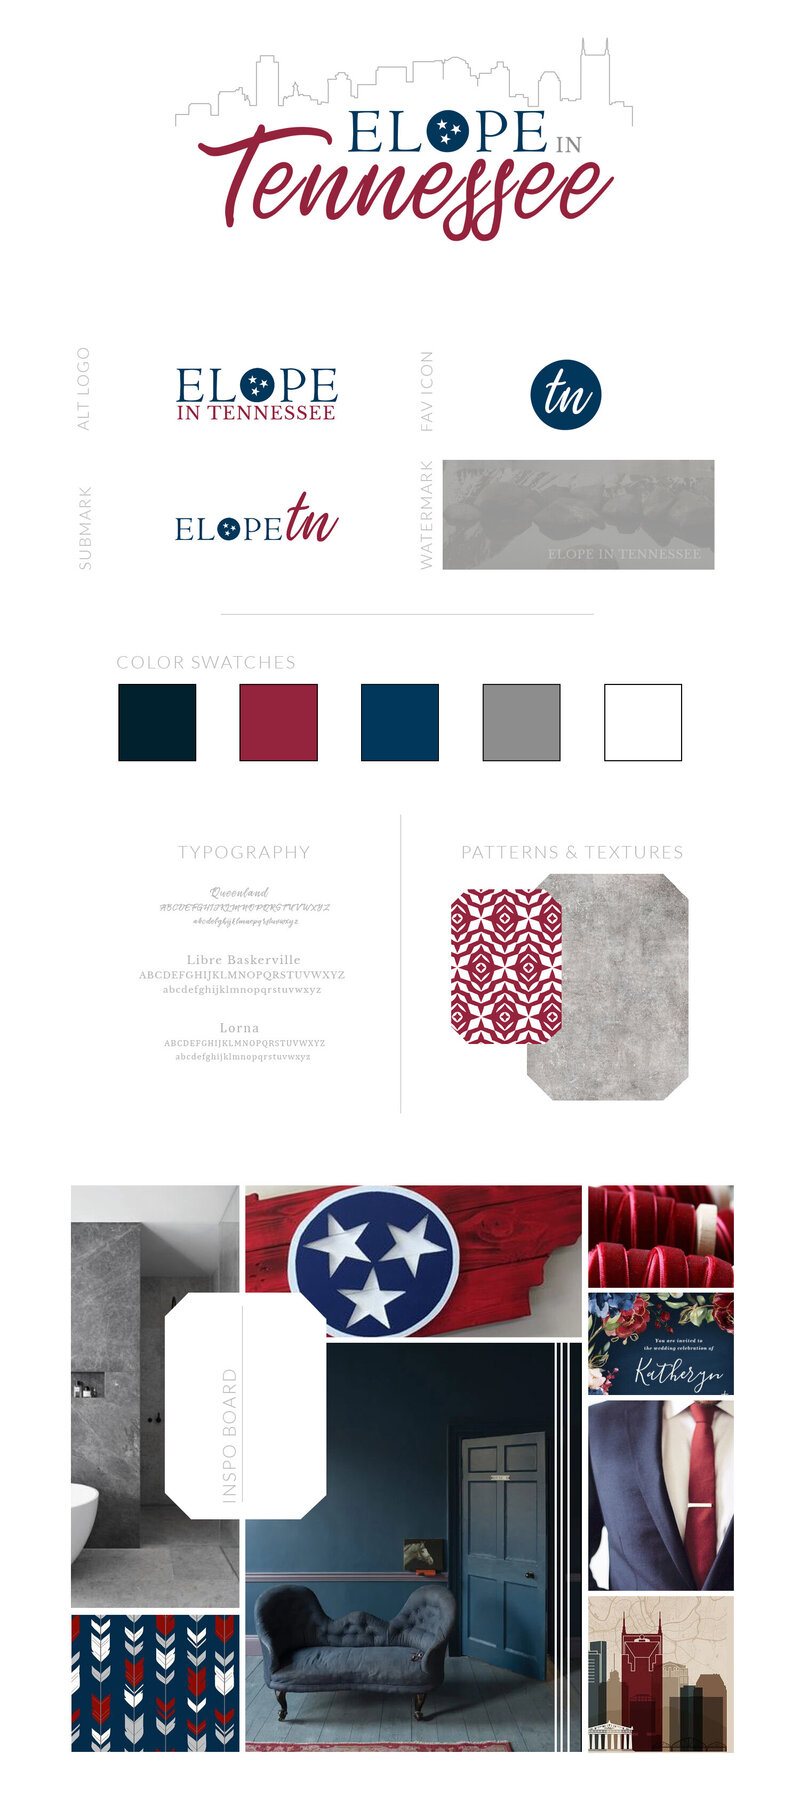 Branding Board mockup for Elope in Tennessee with Mood board attached